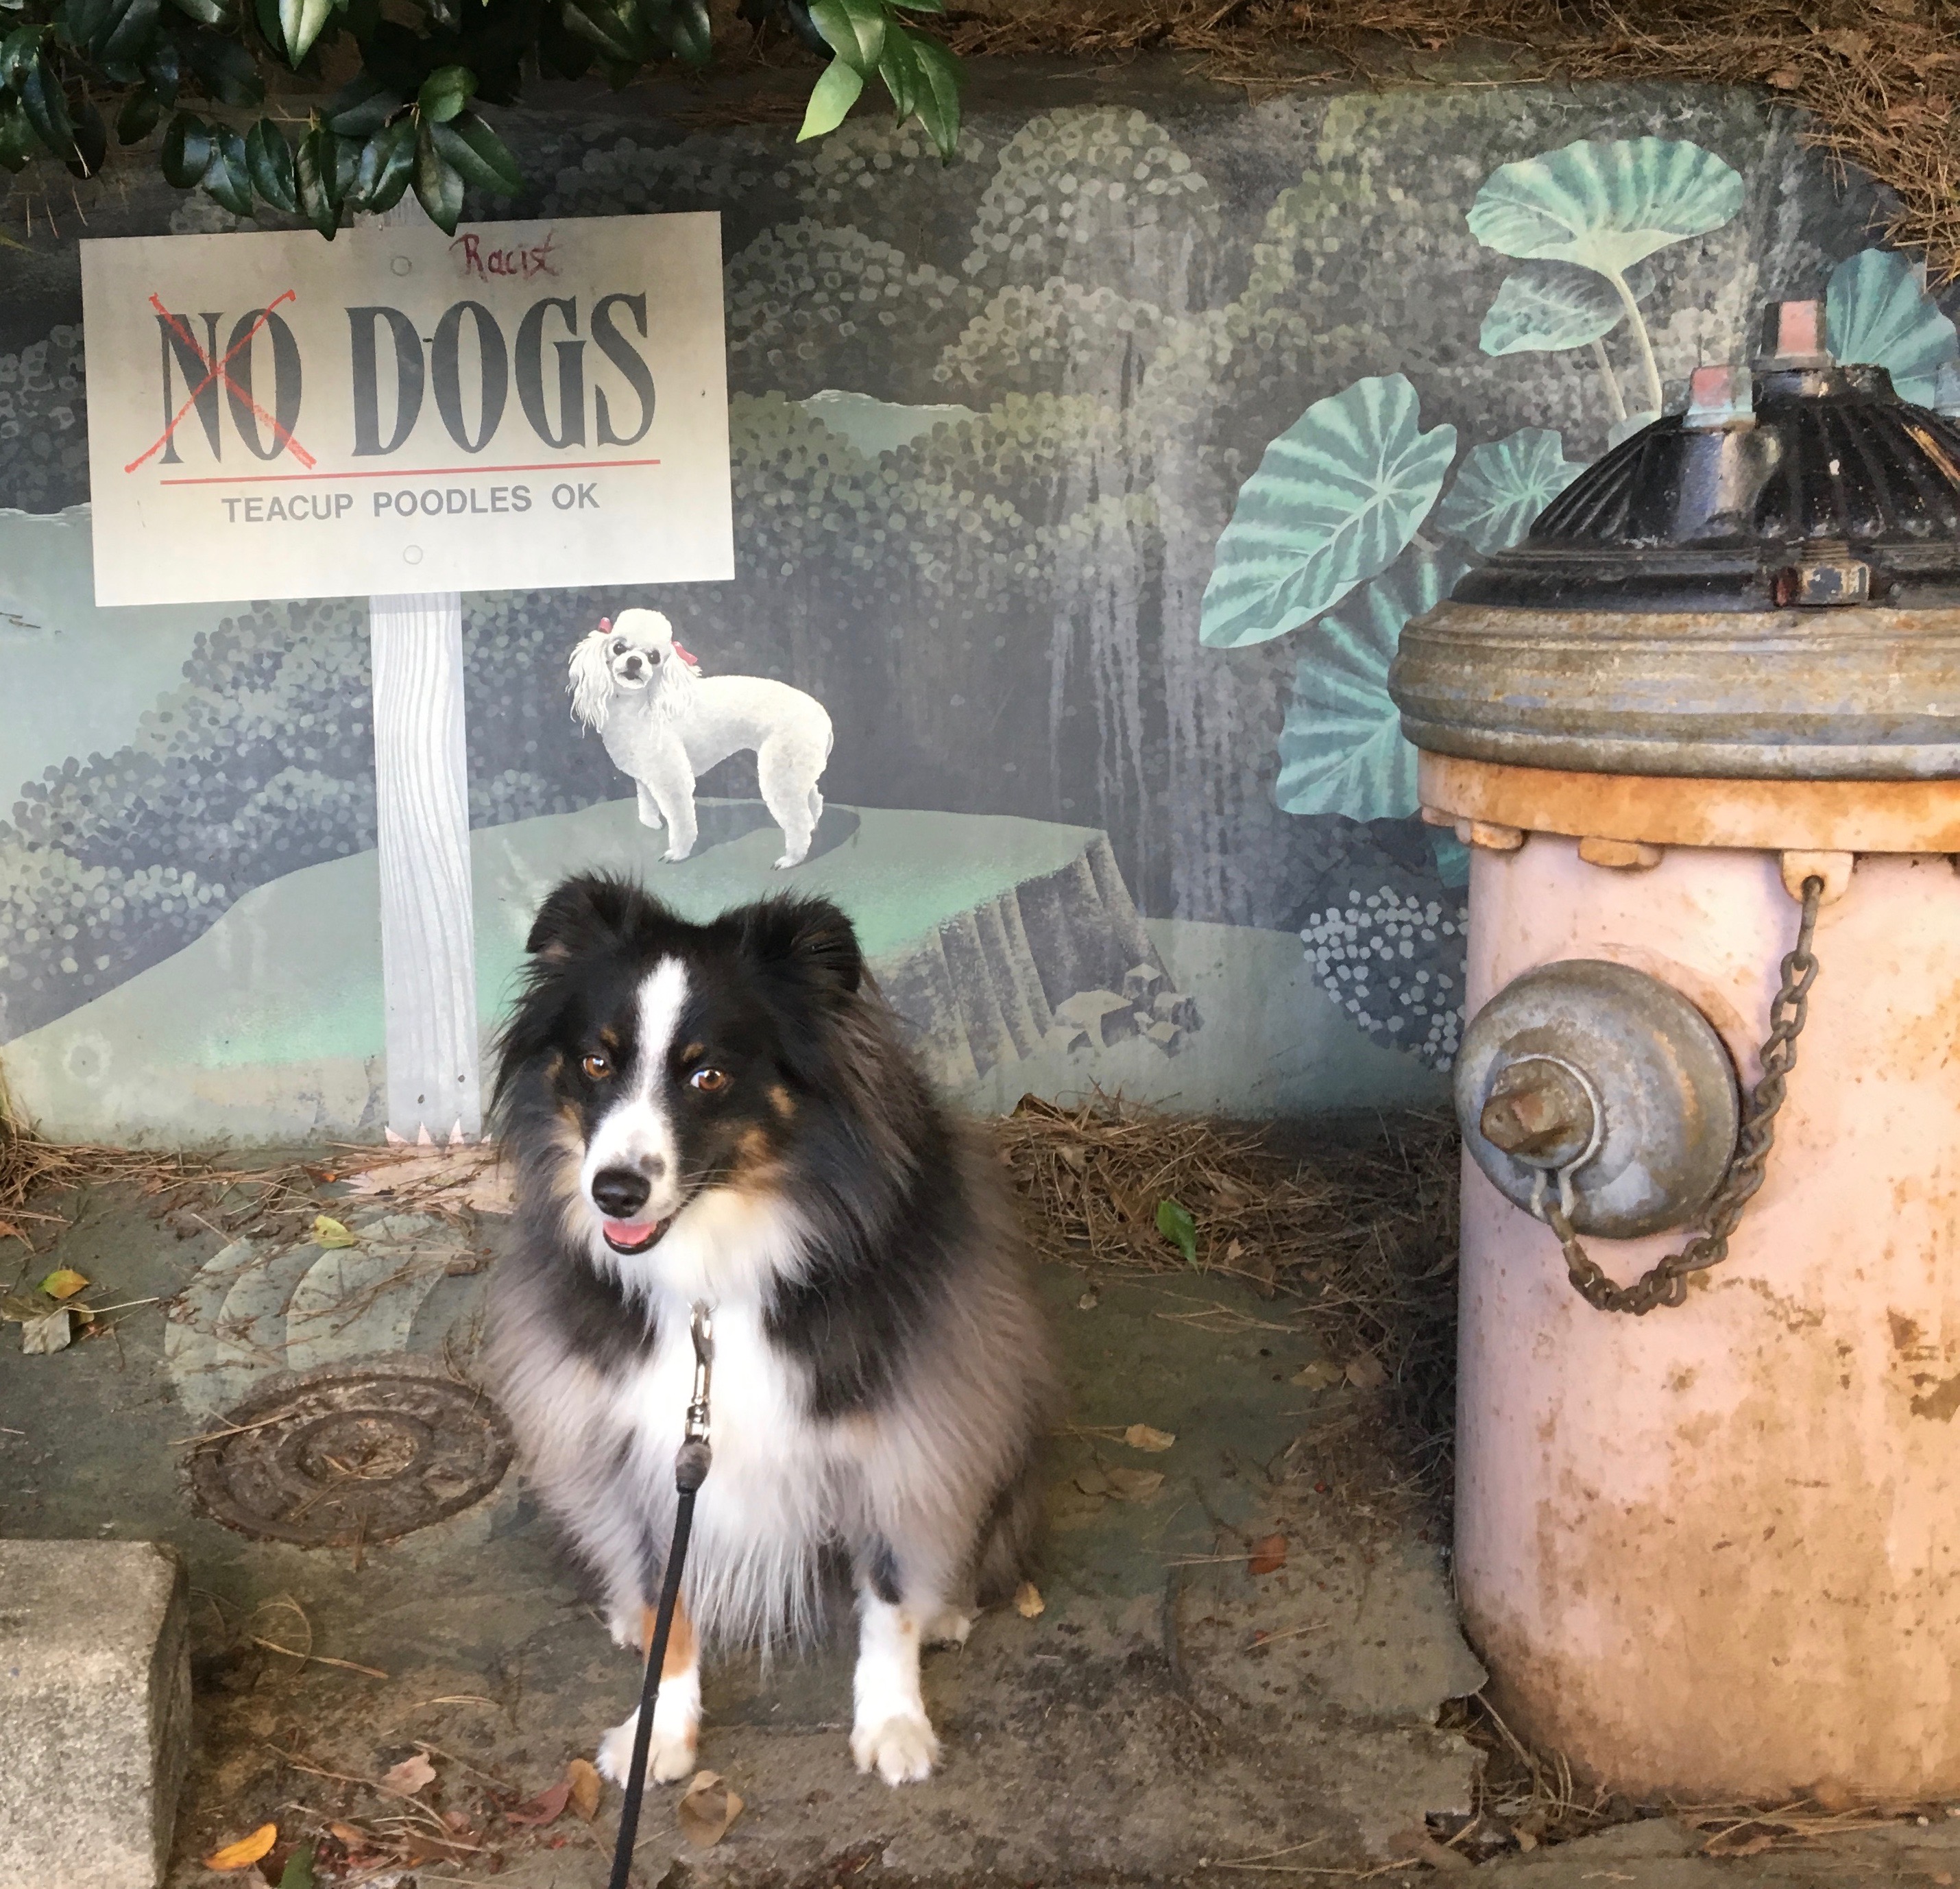 Miniature Australian Shepherd Next To Fire Hydrant And No Dogs Teacup Poodles Okay Sign Mural